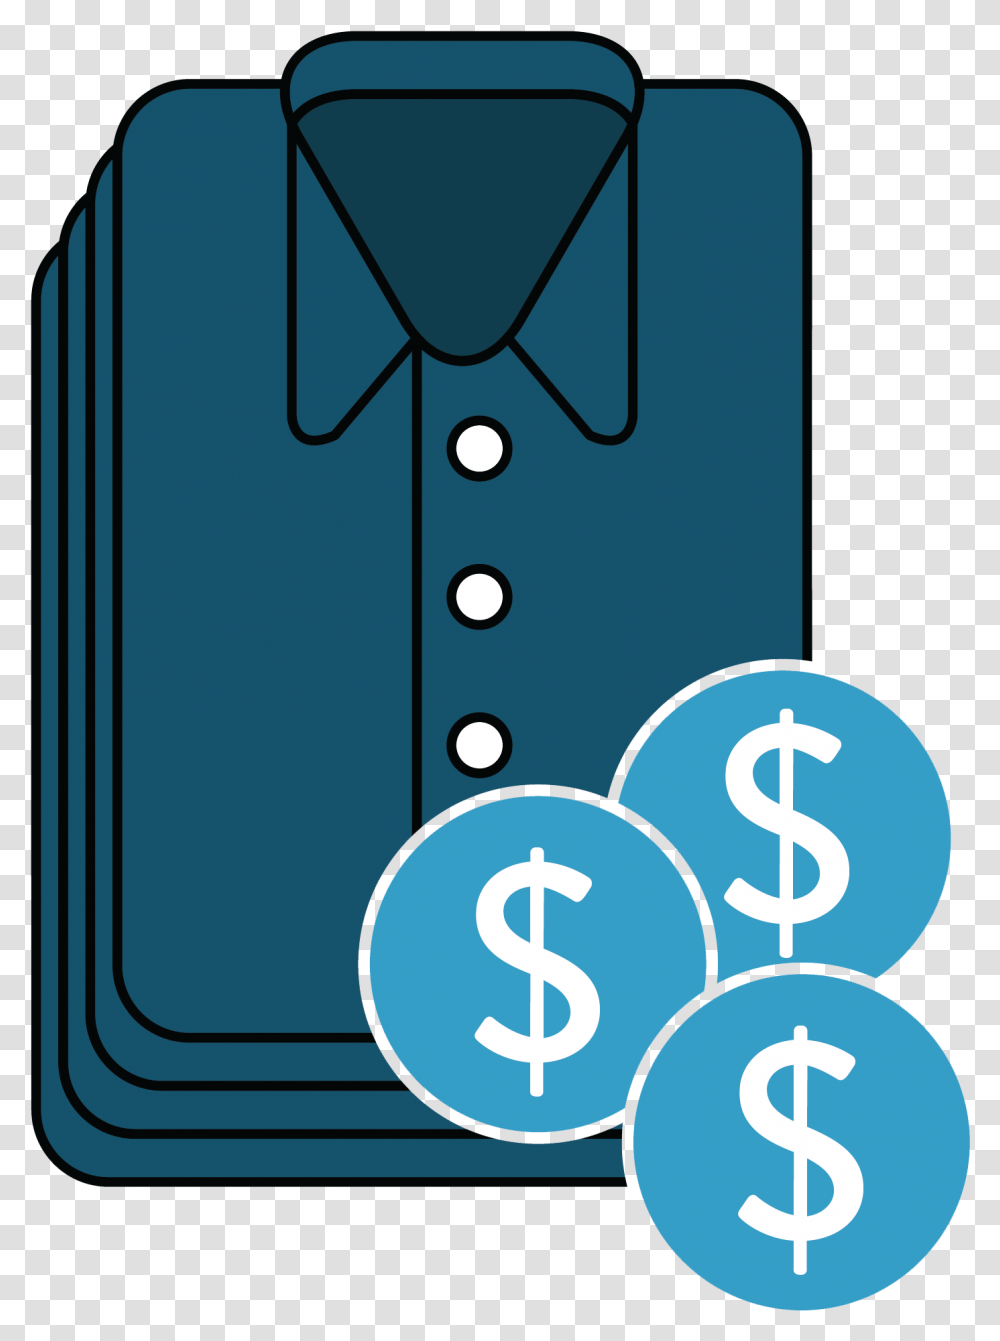 Dry Cleaning Credit Illustration, Shirt, Tie, Accessories Transparent Png